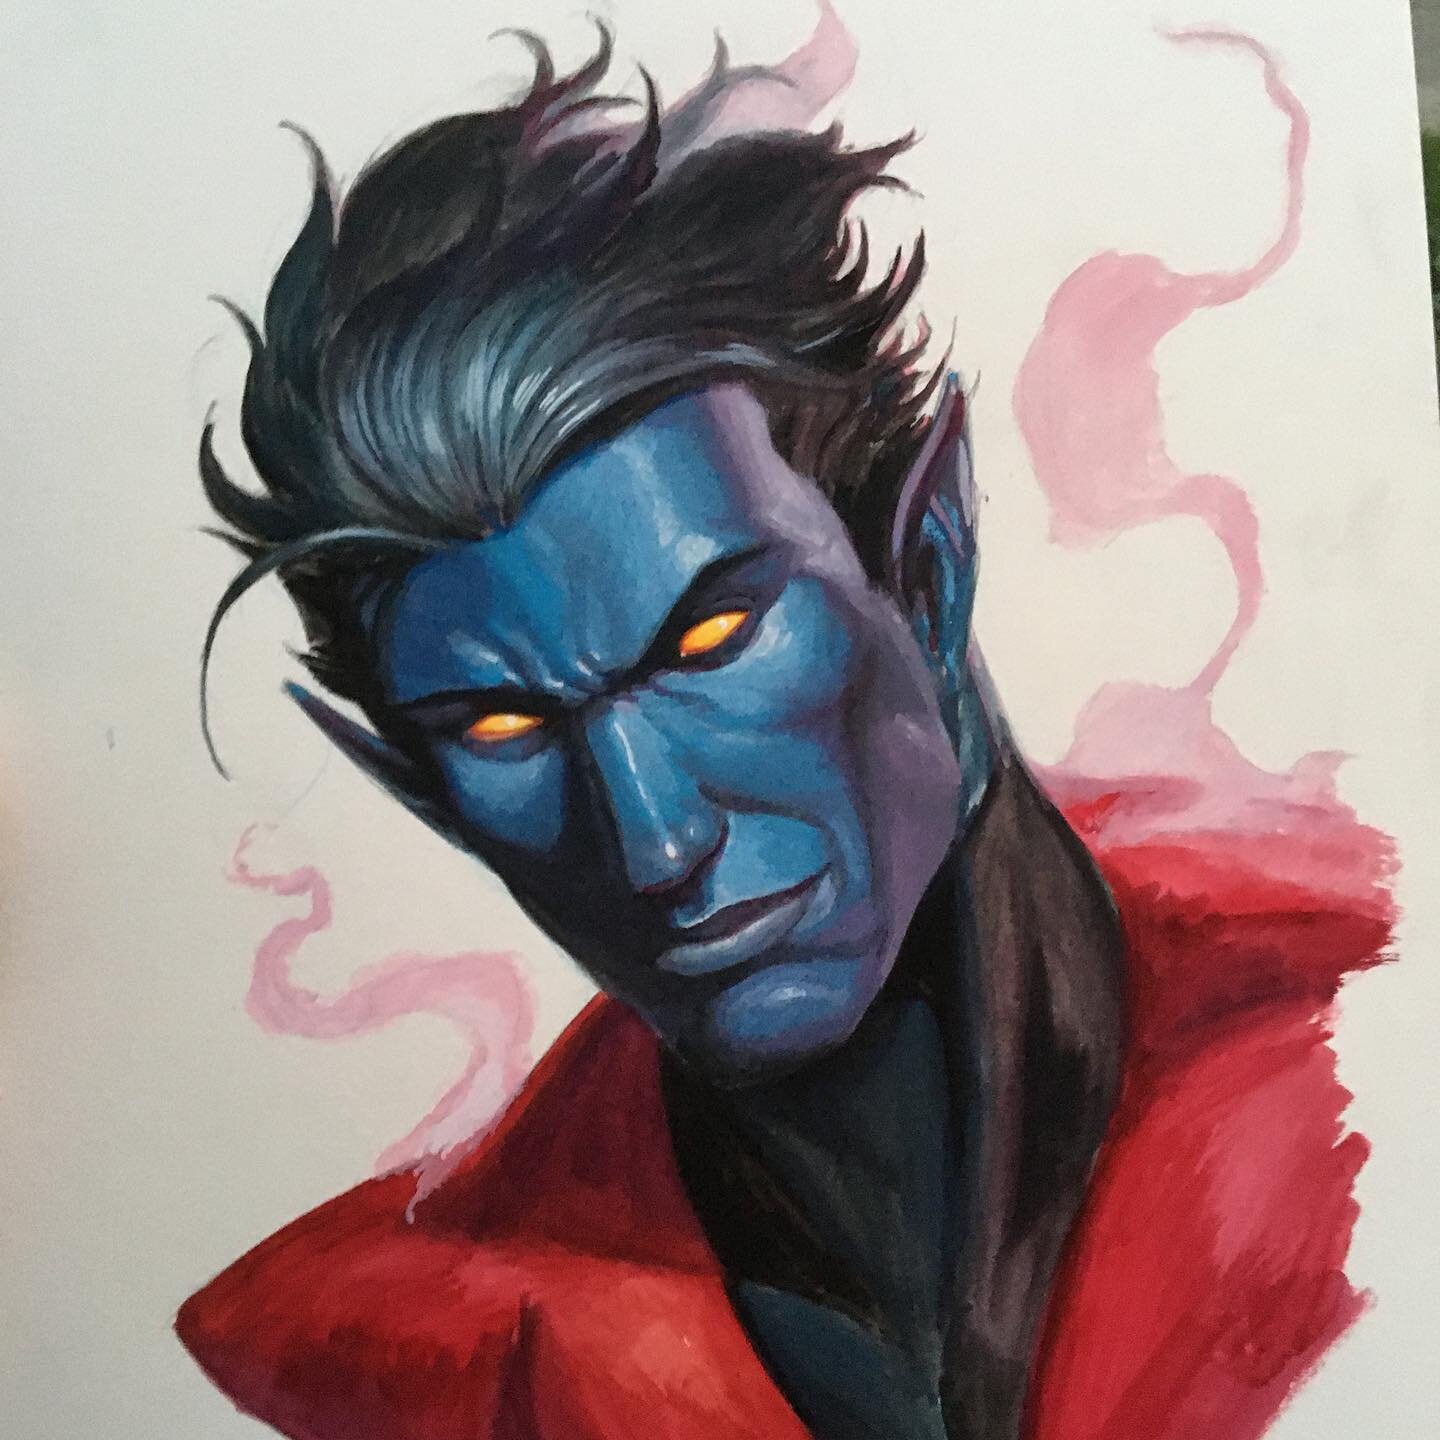 Hey all! Just wanted to share the process for this Nightcrawler painting I did for NYCC&rsquo;s St Jude charity art auction. 11x14, gouache on paper. #xmen #nightcrawler #gouache